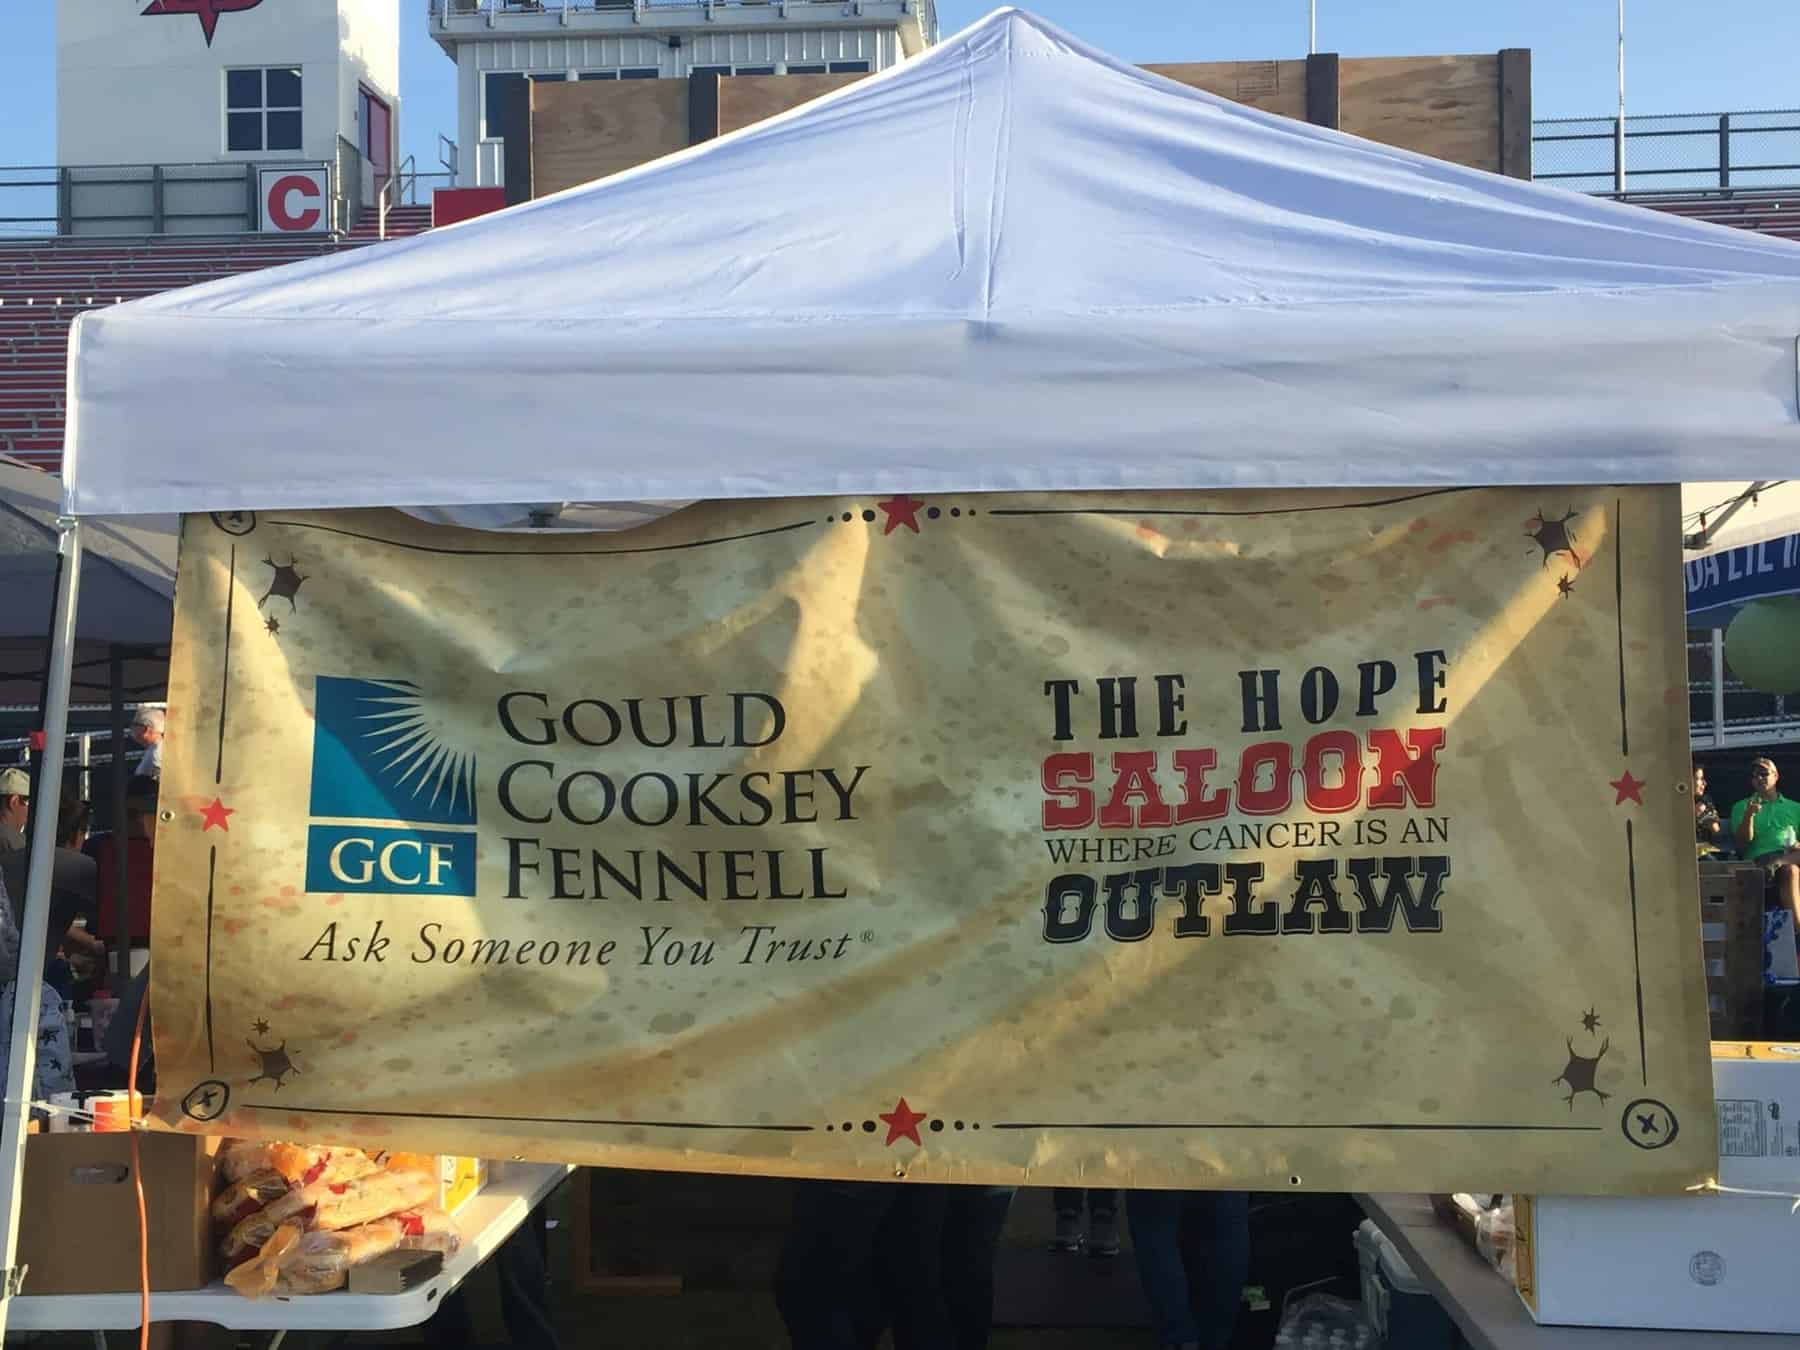 Gould Cooksey Fennell sponsor banner with The Hope Saloon Where Cancer is an Outlaw on the sign